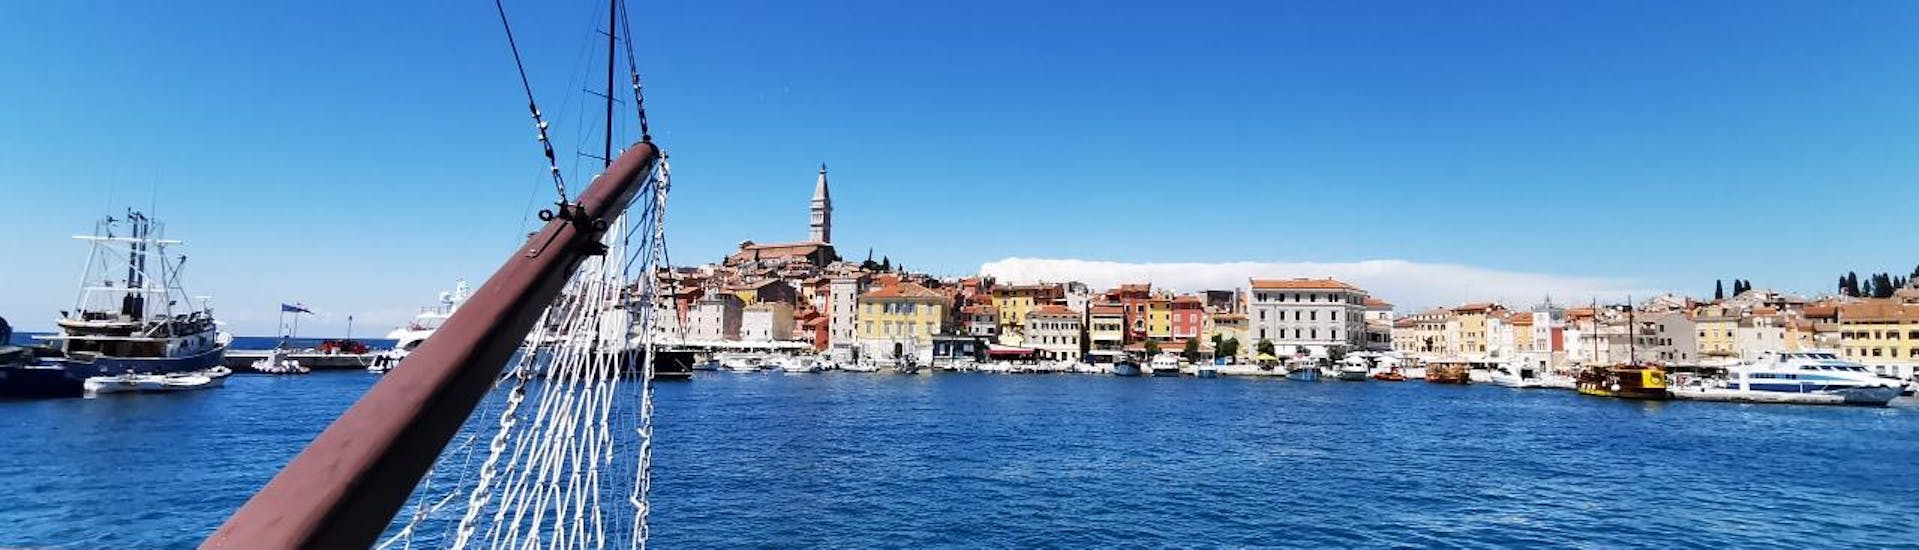 During the Boat Trip to Rovinj & Lim Fjord with Swimming Stop, the boat Santa Ana is reaching the port of Rovinj.